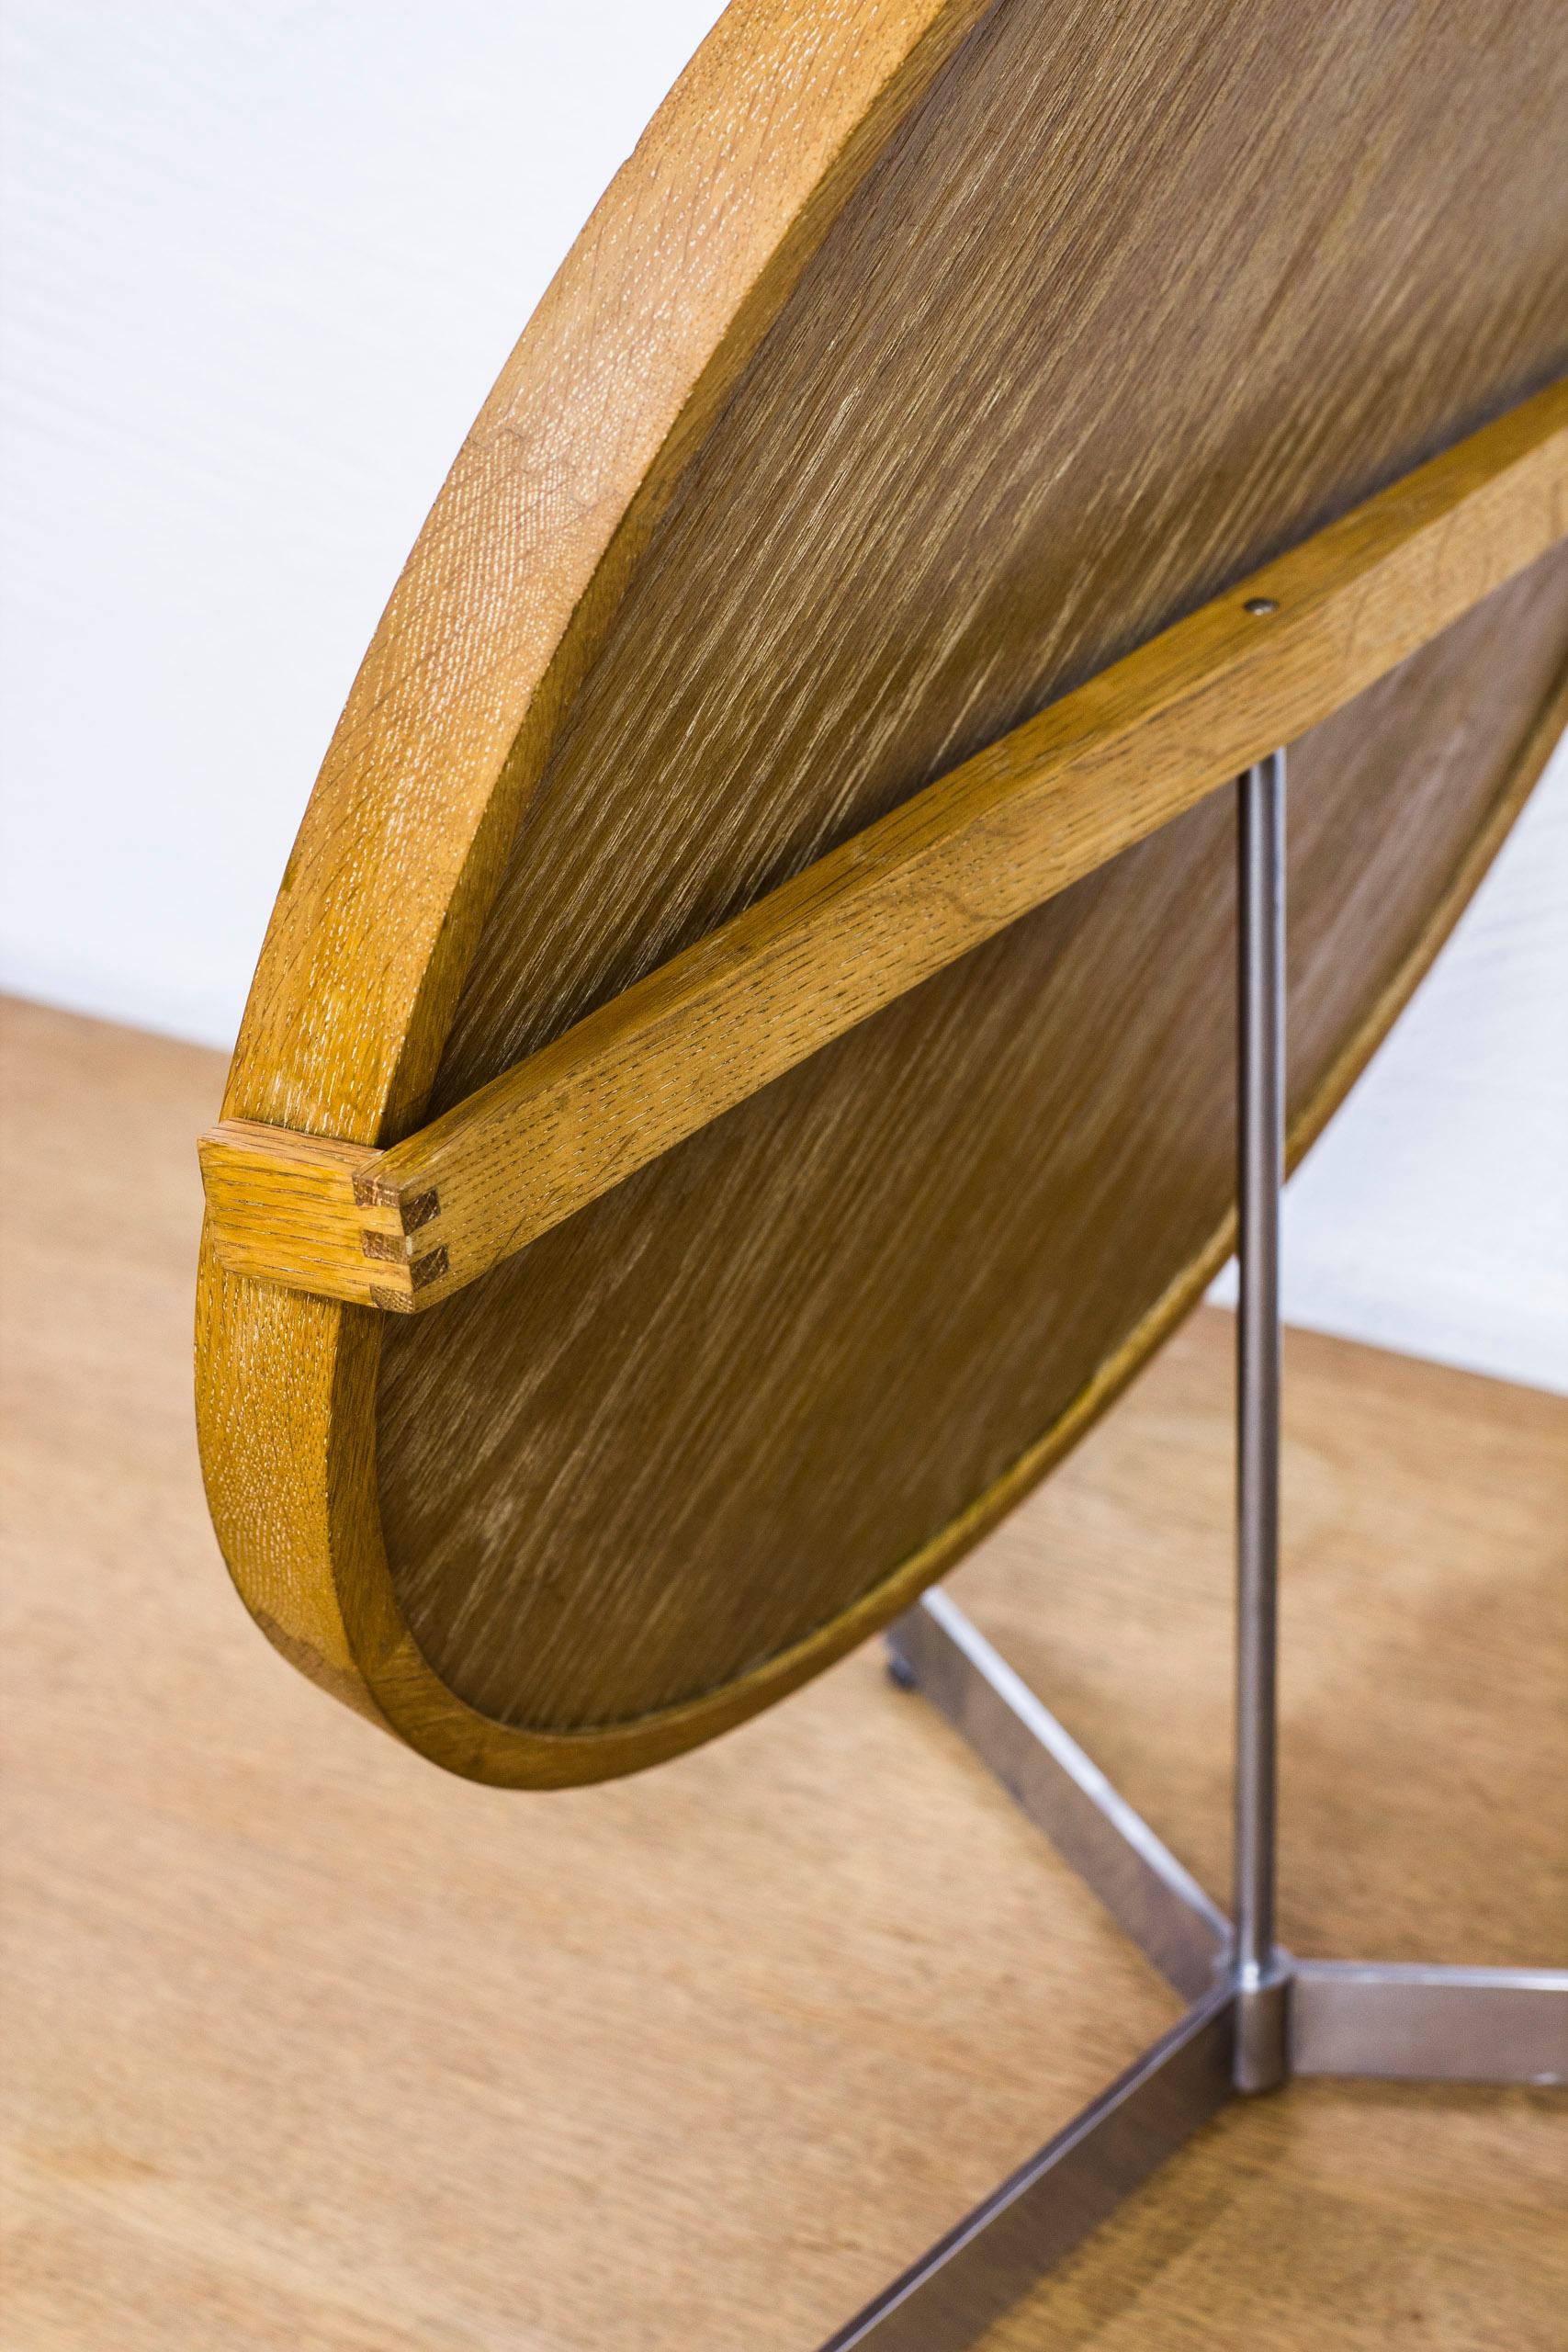 Mid-20th Century Table Mirror by Uno & Östen Kristiansson for Luxus, Sweden, 1950s For Sale